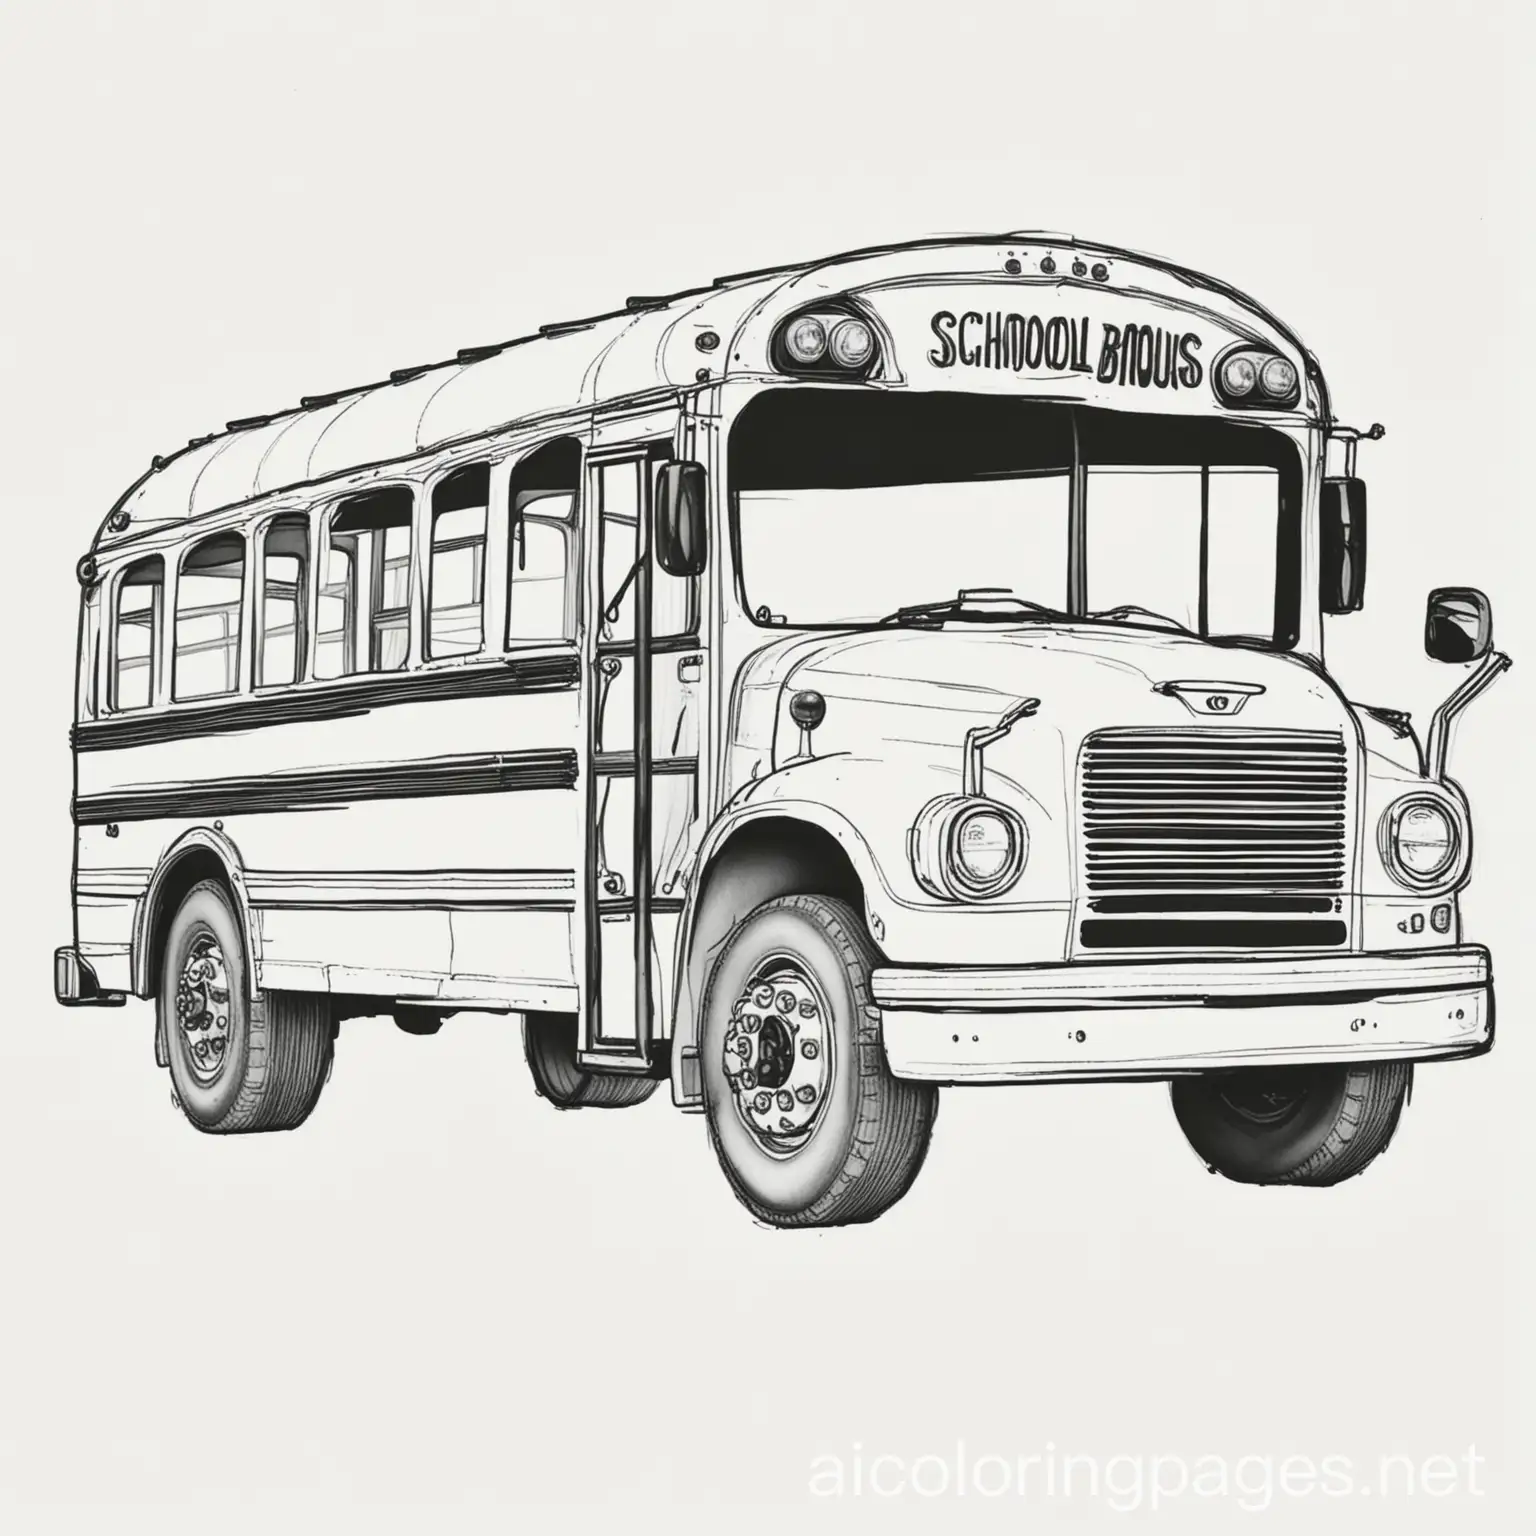 school bus, Coloring Page, black and white, line art, white background, Simplicity, Ample White Space. The background of the coloring page is plain white to make it easy for young children to color within the lines. The outlines of all the subjects are easy to distinguish, making it simple for kids to color without too much difficulty